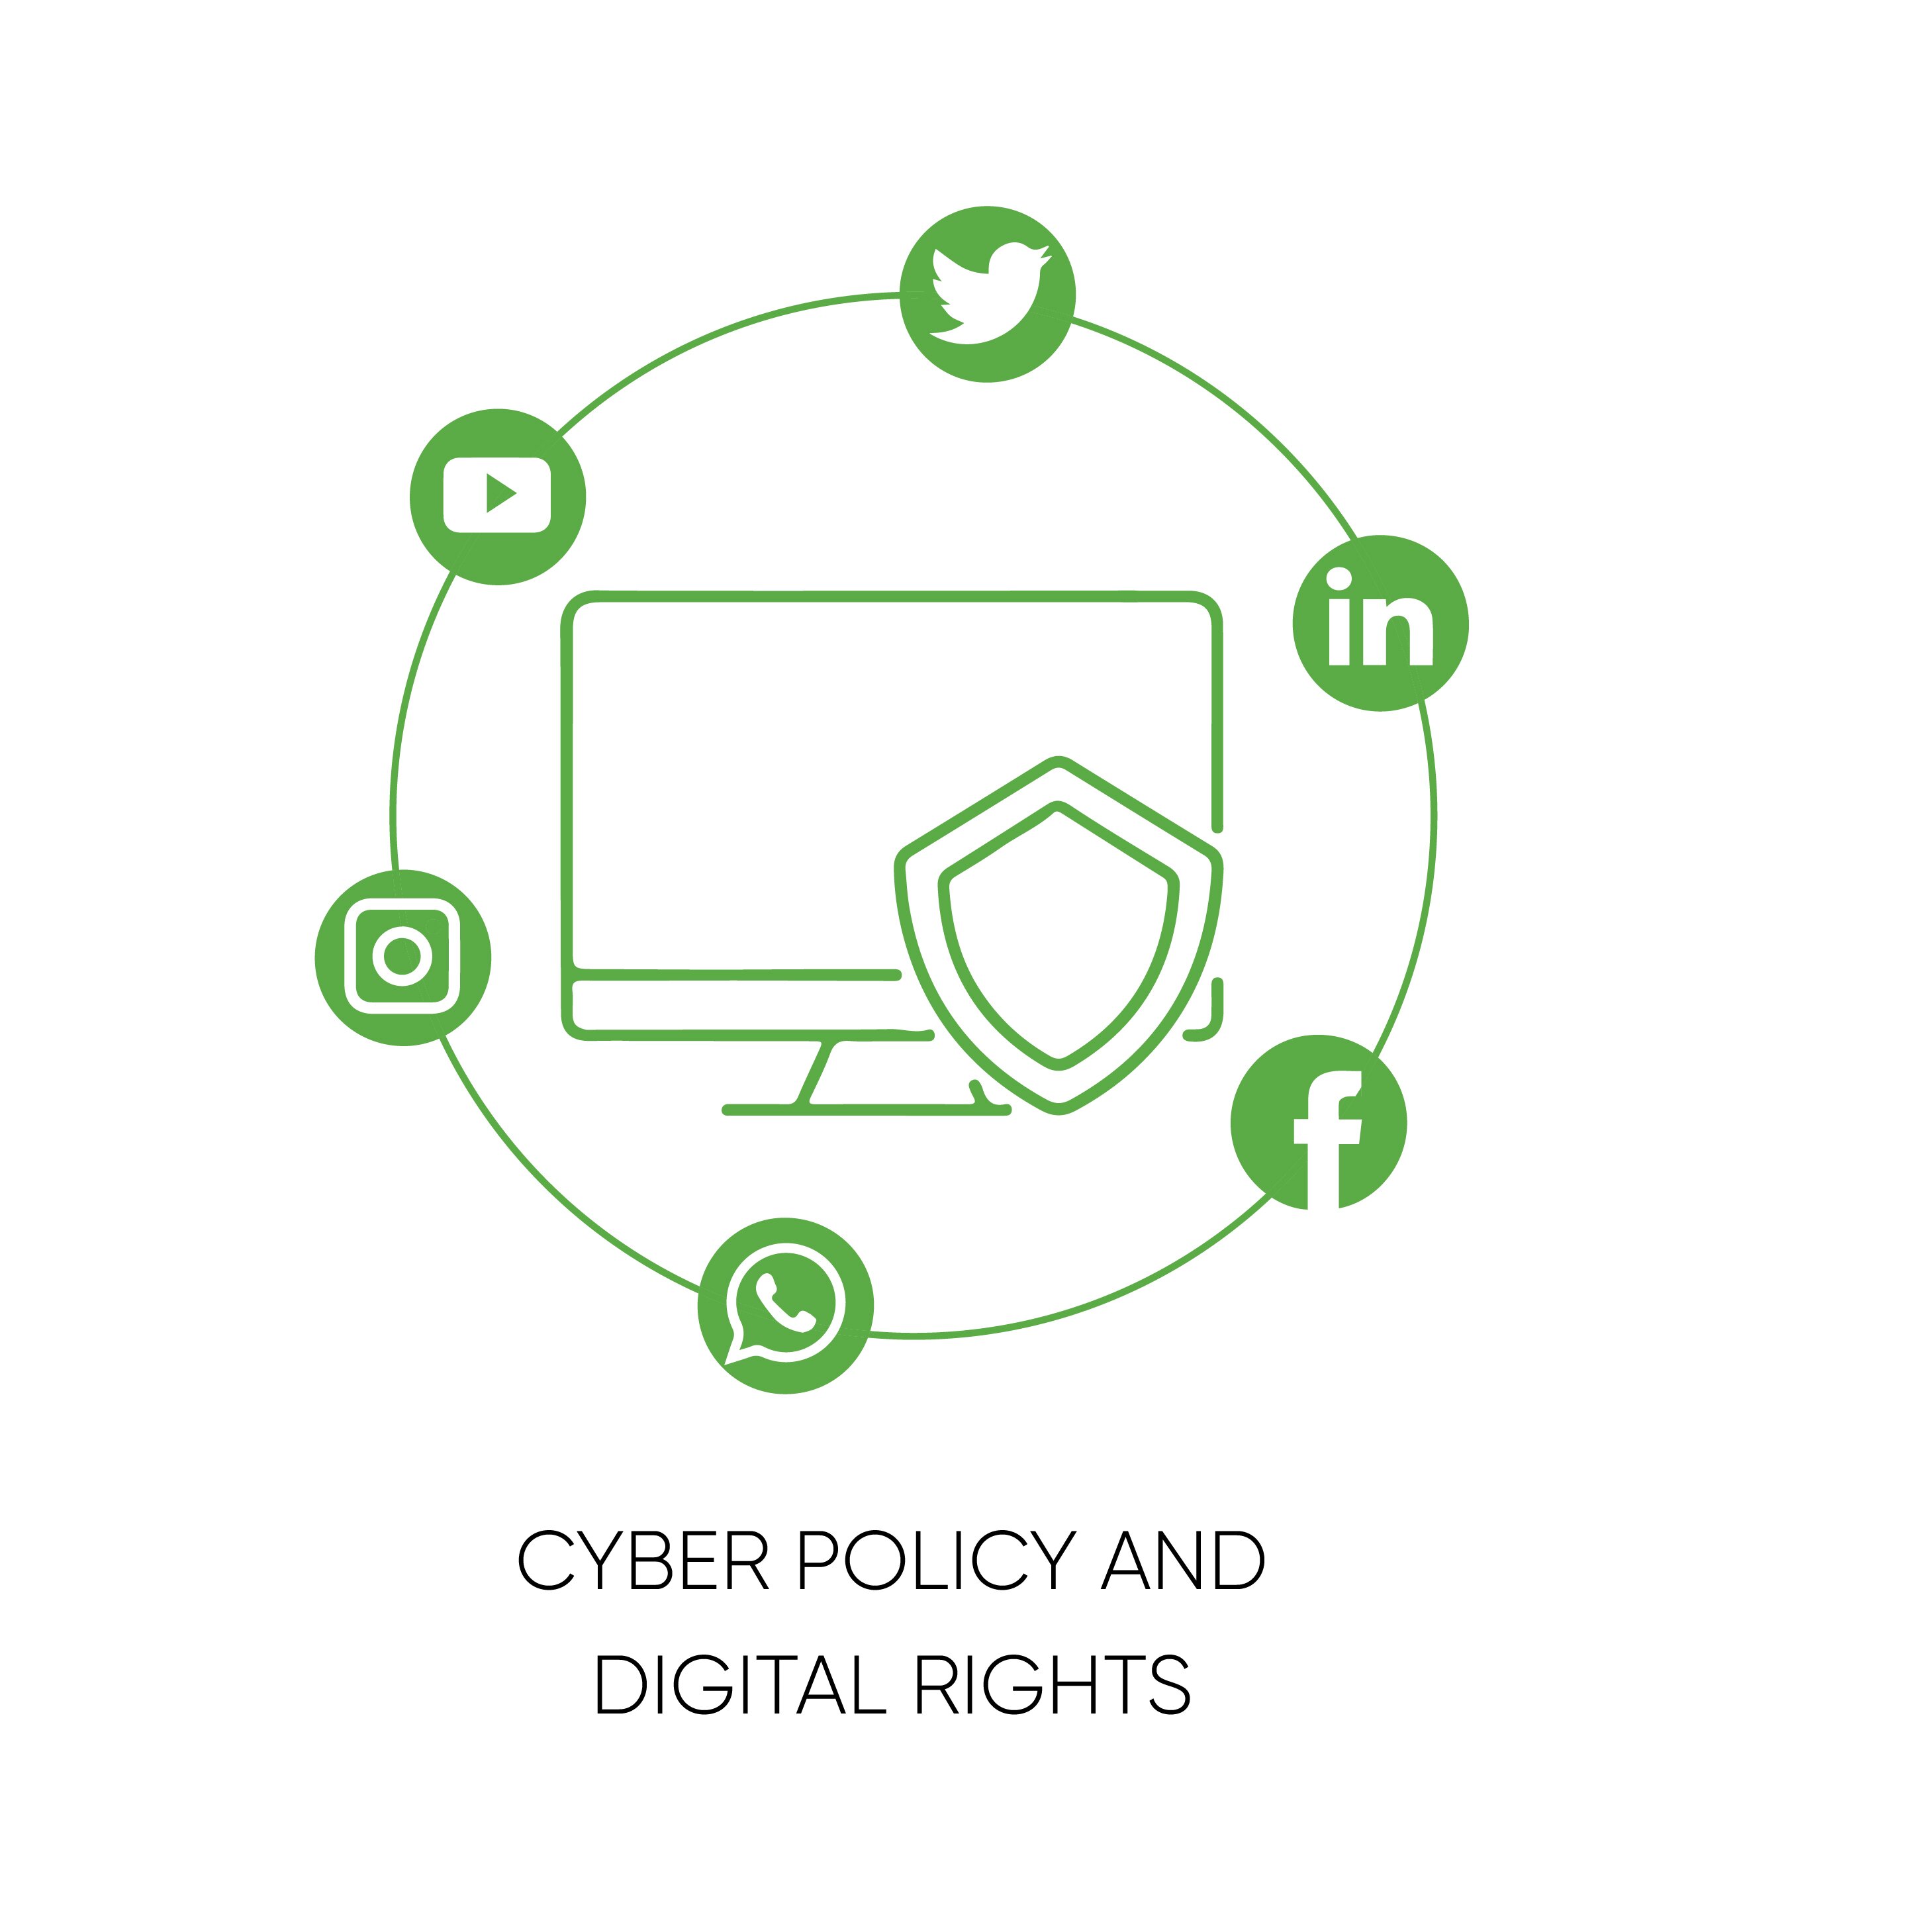 Cyber Policy And Digital Rights